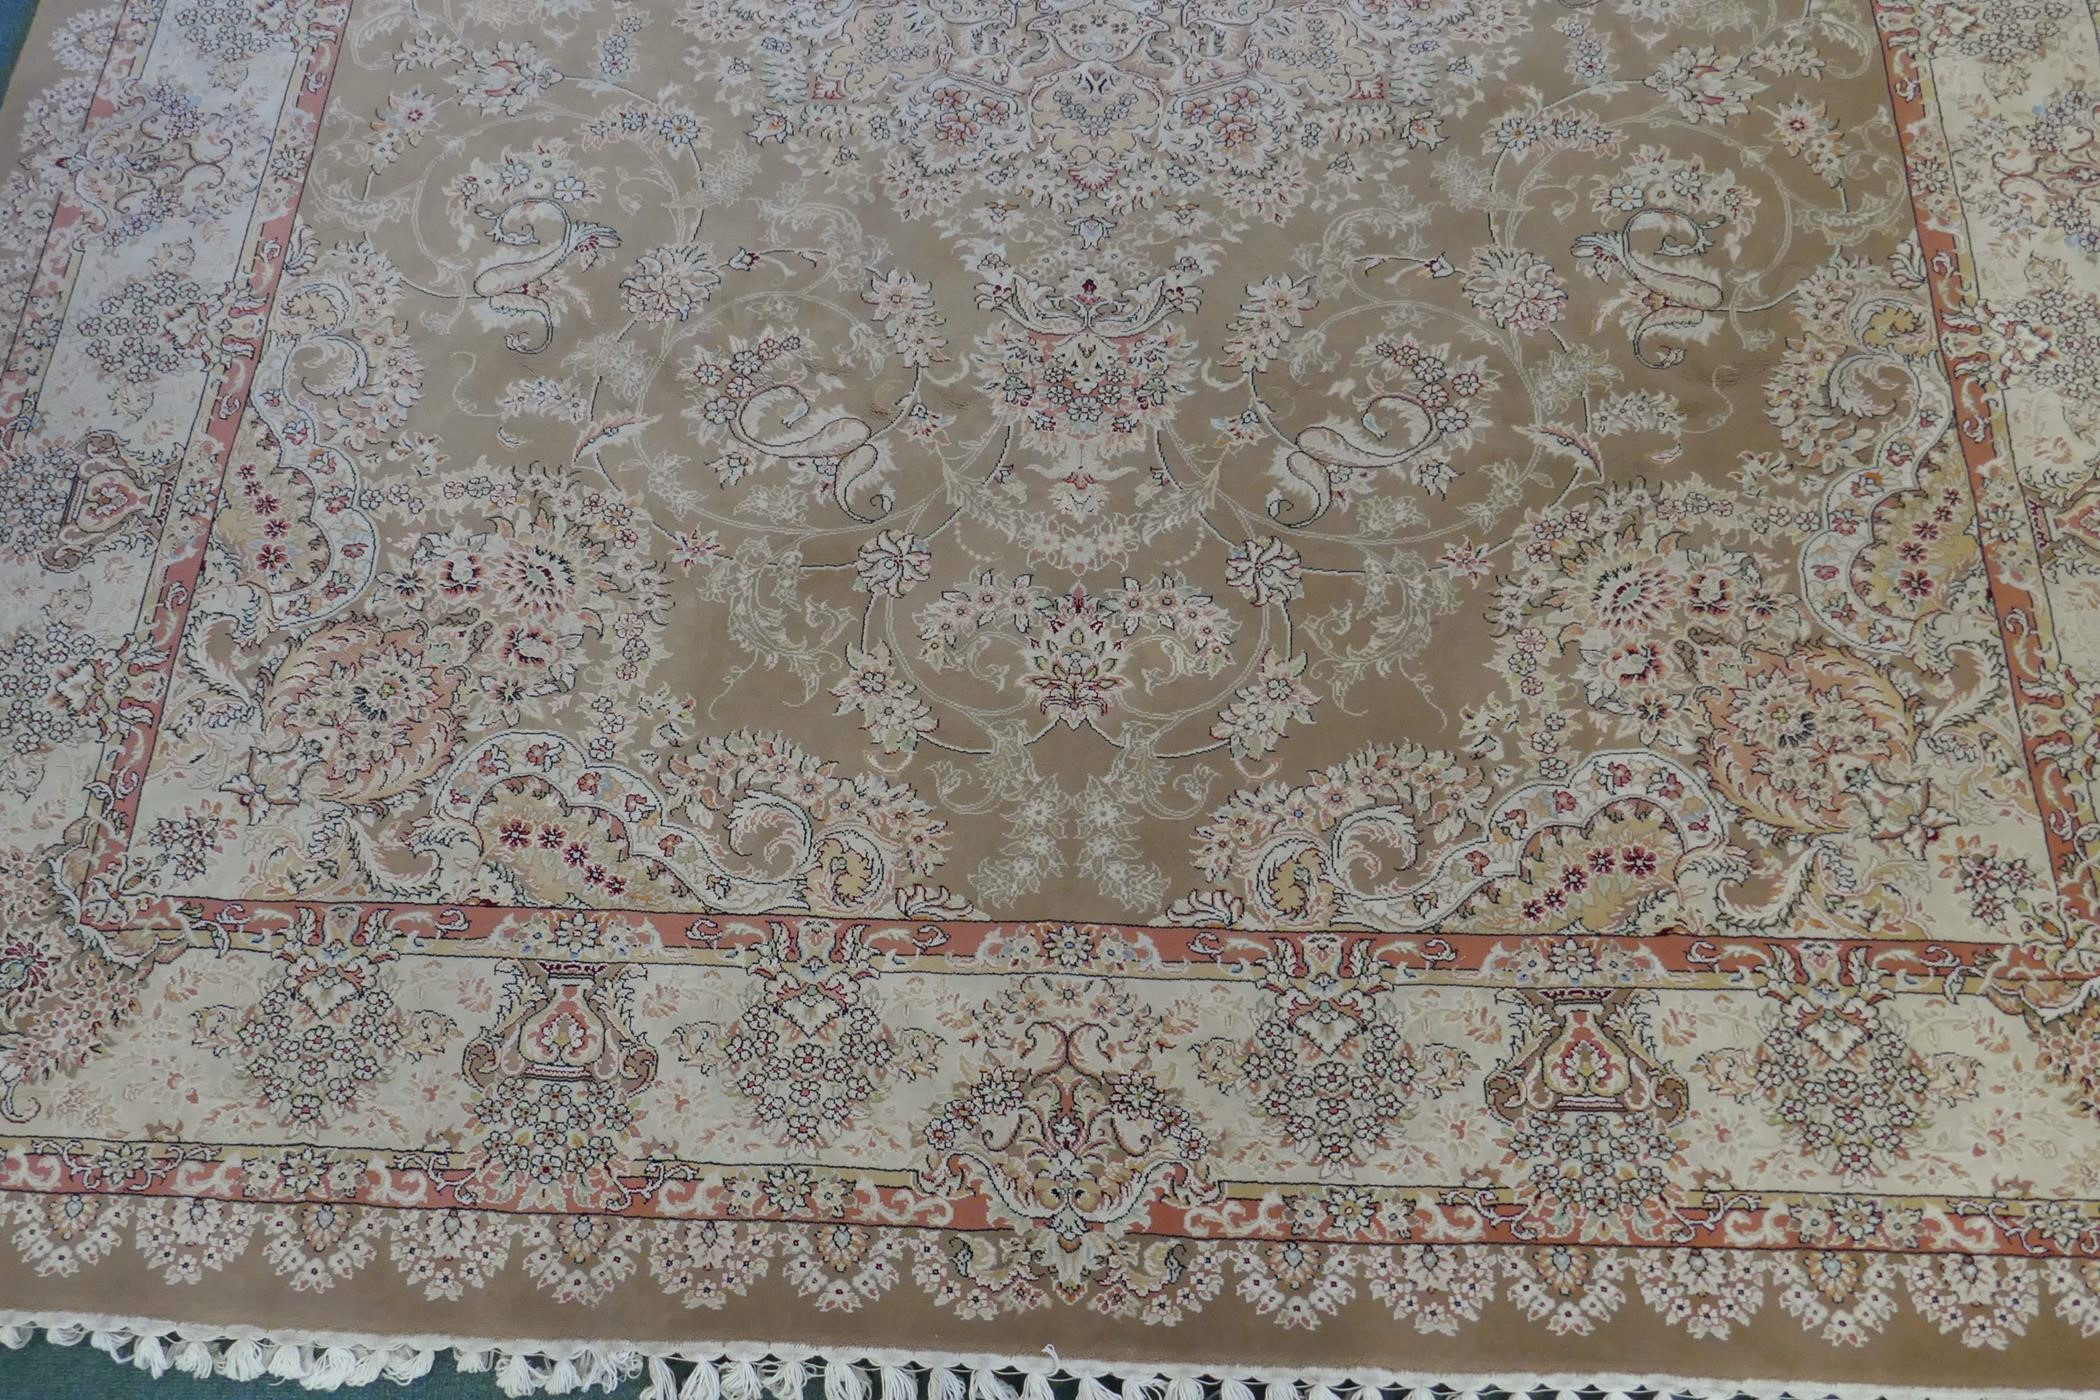 A large fine woven Iranian carpet with bespoke floral design on a buff coloured ground, 300 x 390cm - Image 3 of 6